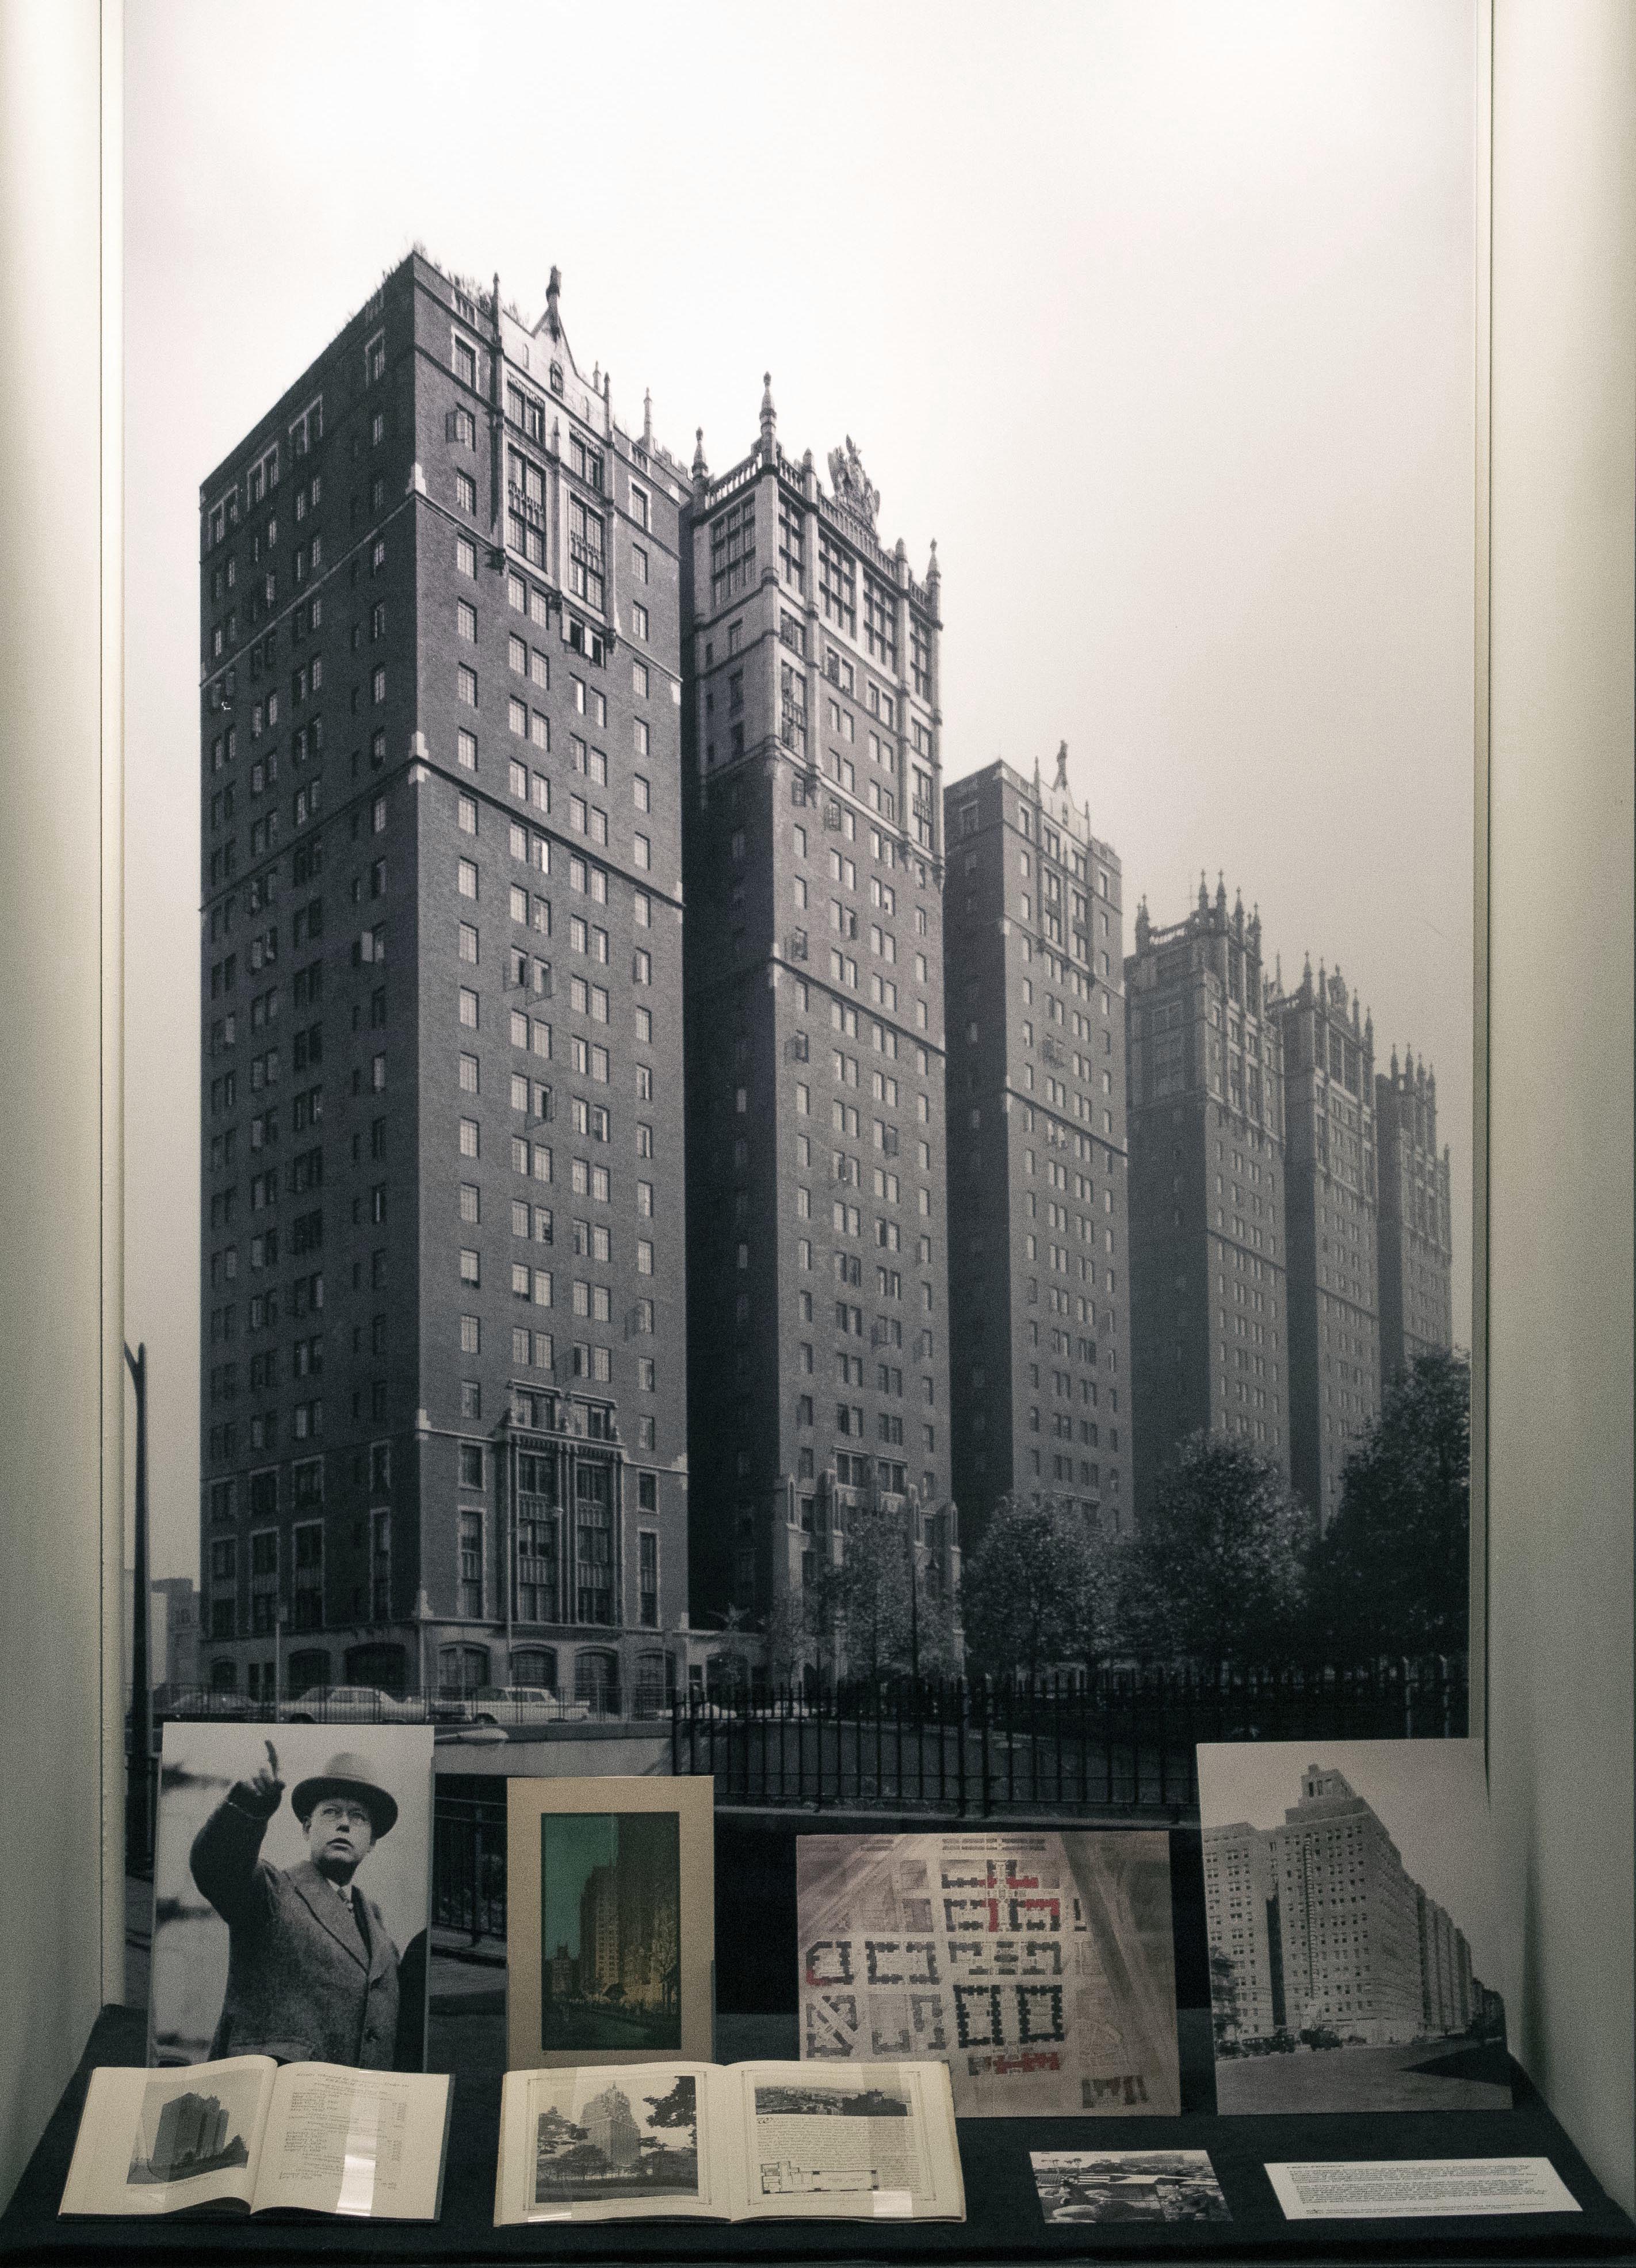 Installation view of the Tudor City case